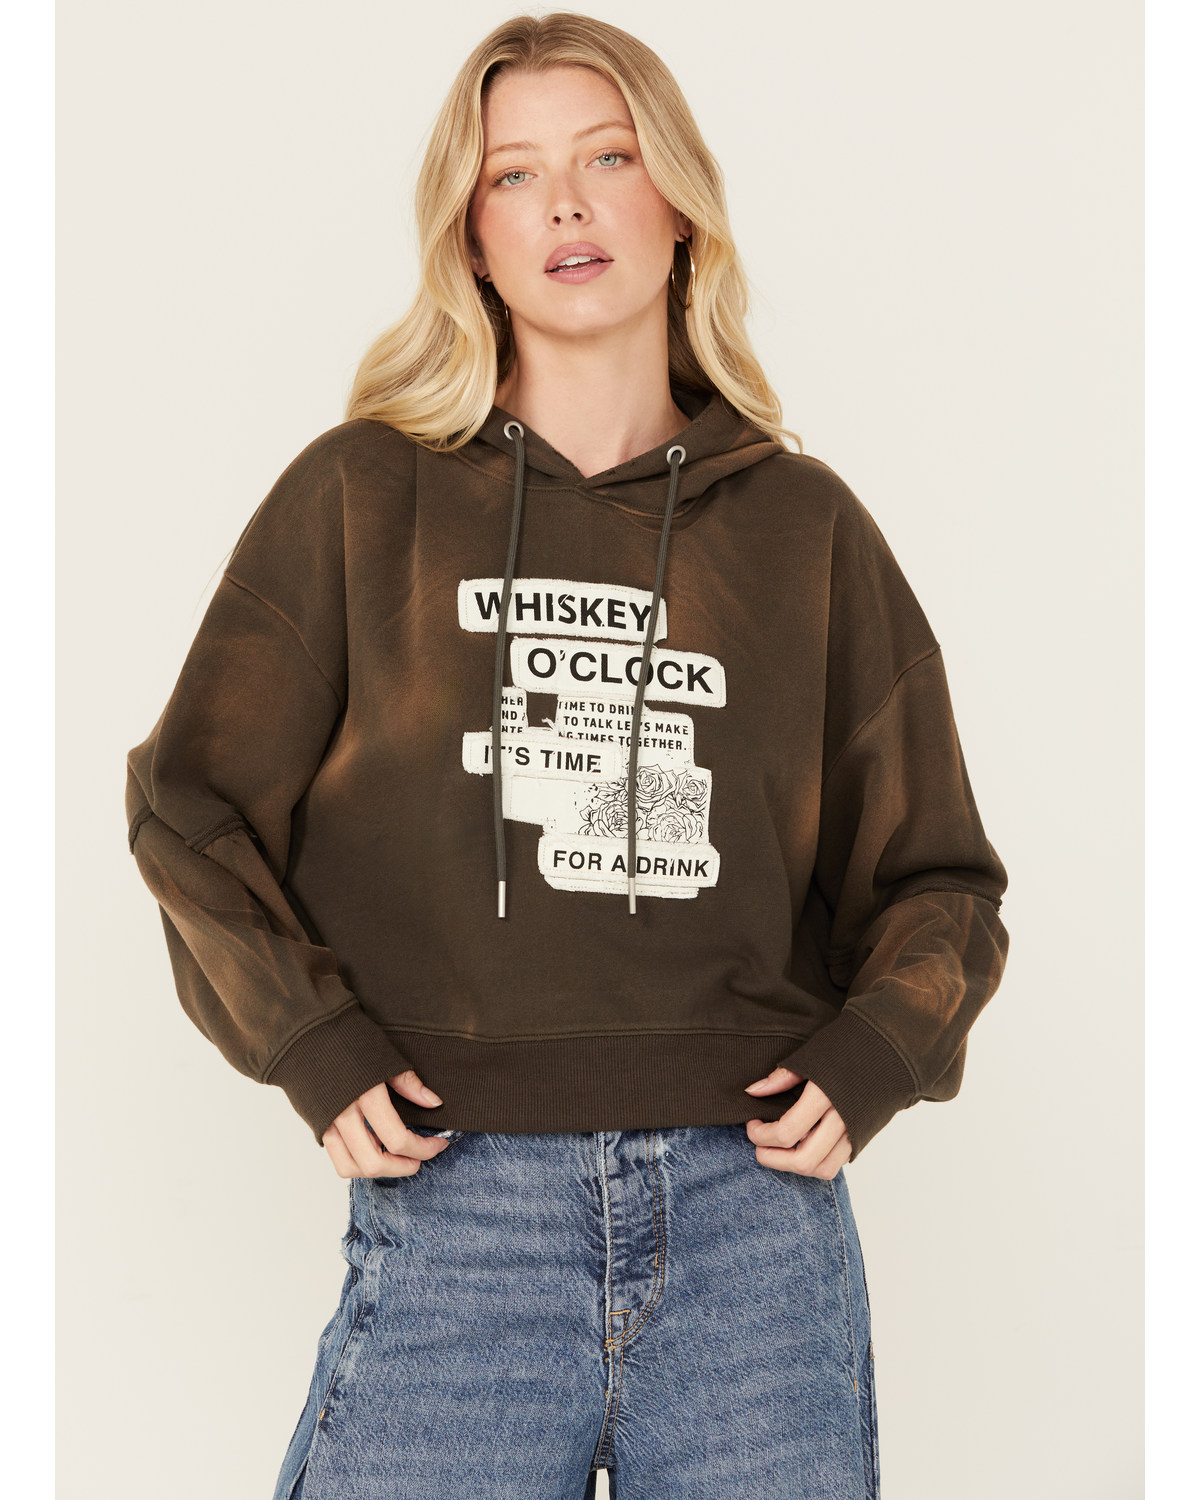 Cleo + Wolf Women's Bleached Deconstructed Whiskey Cropped Hoodie